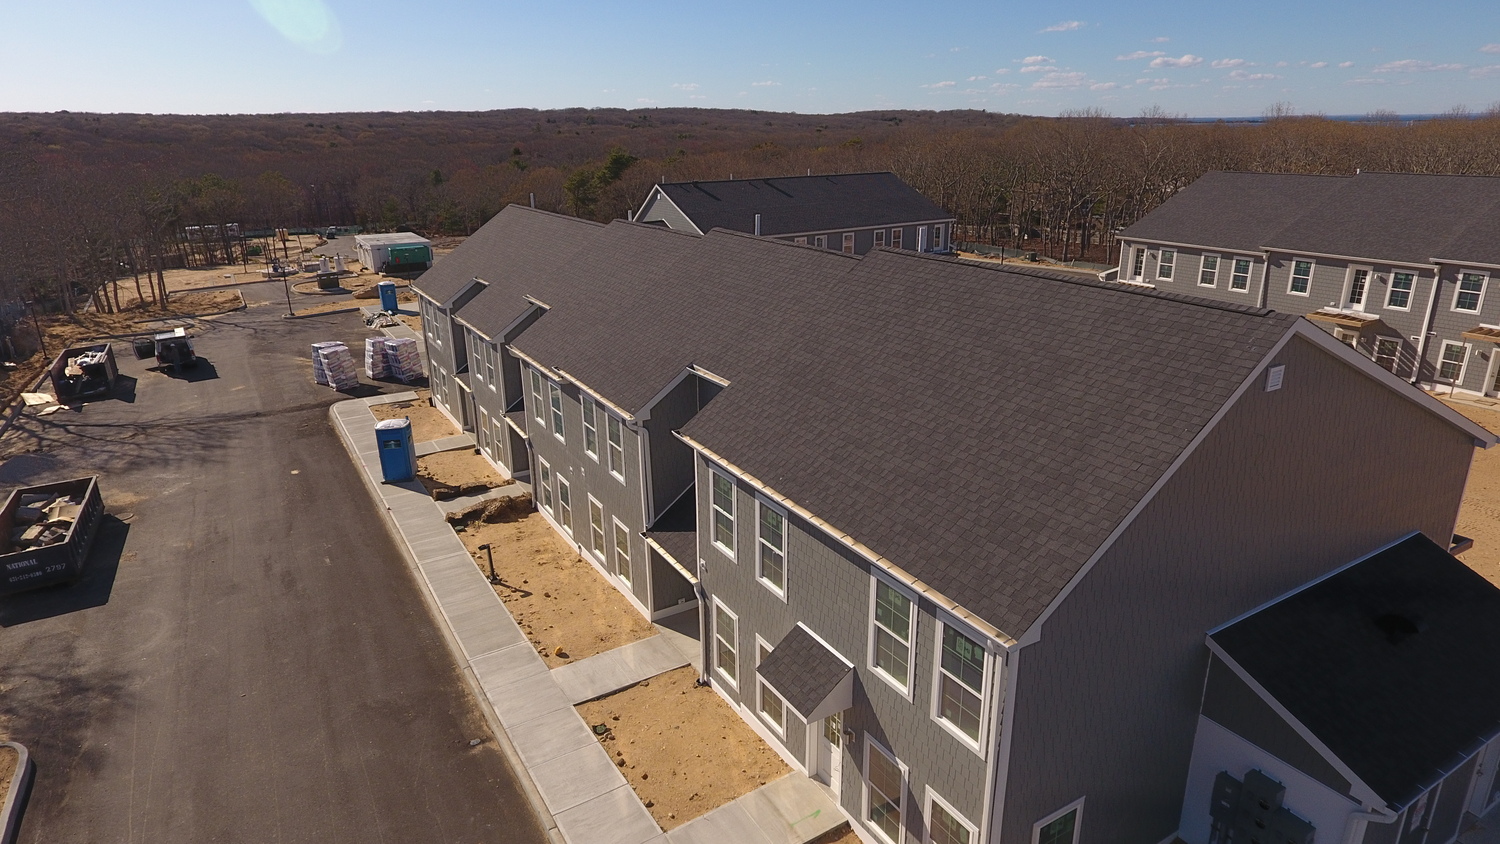 The East Hampton Housing Authority has started taking applications for potential tenants at The Green at Gardiners Point, a 50 unit rental apartment development that will be completed this summer. MICHAEL WRIGHT